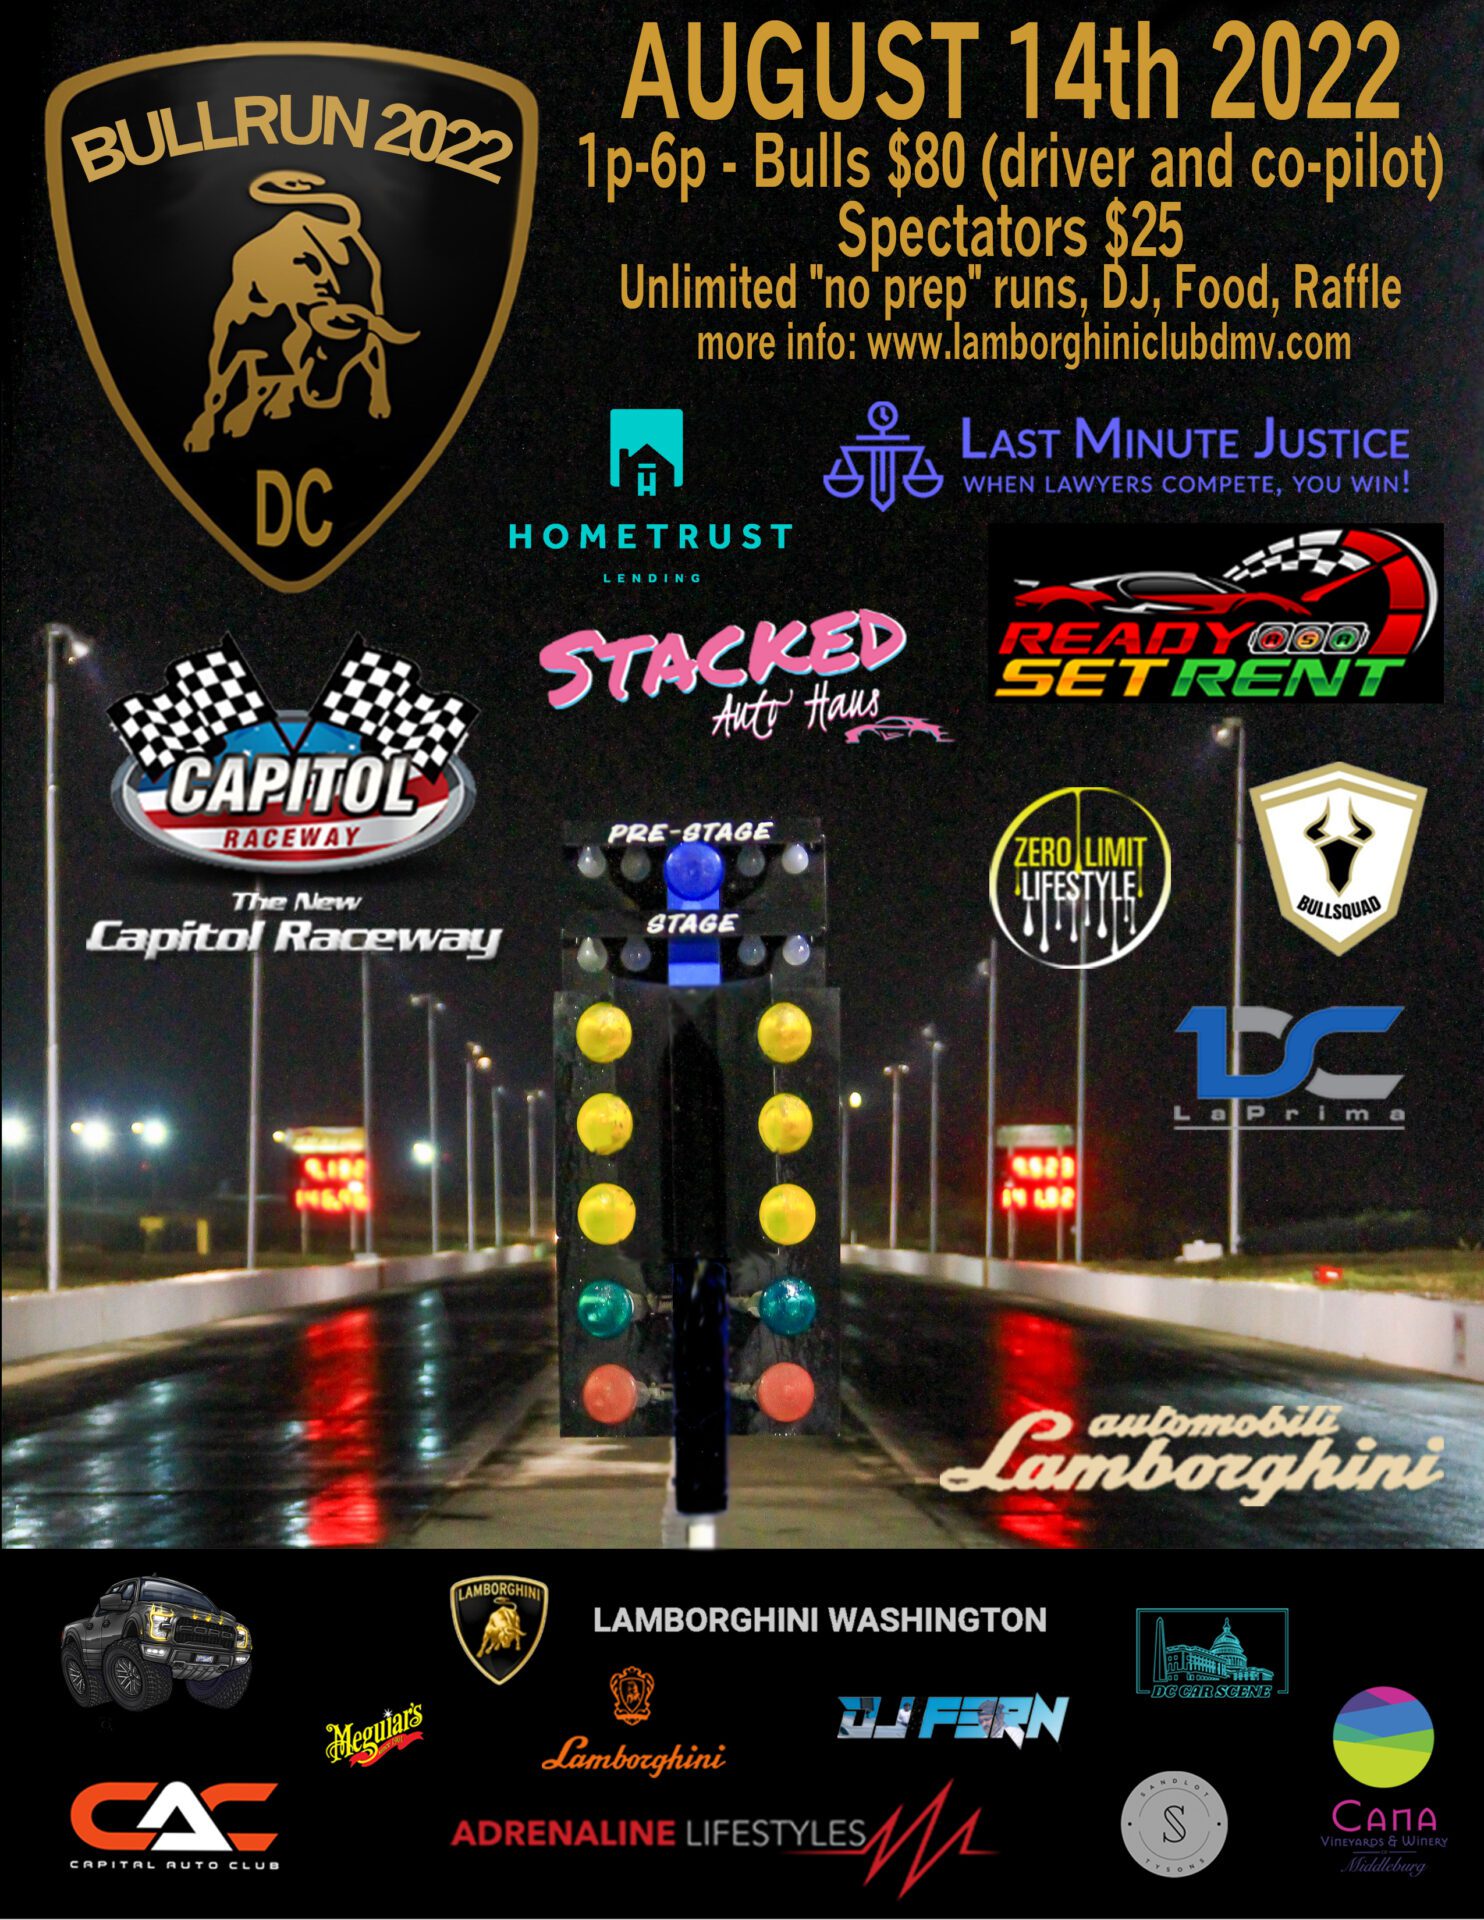 Race Flyer and information on poster